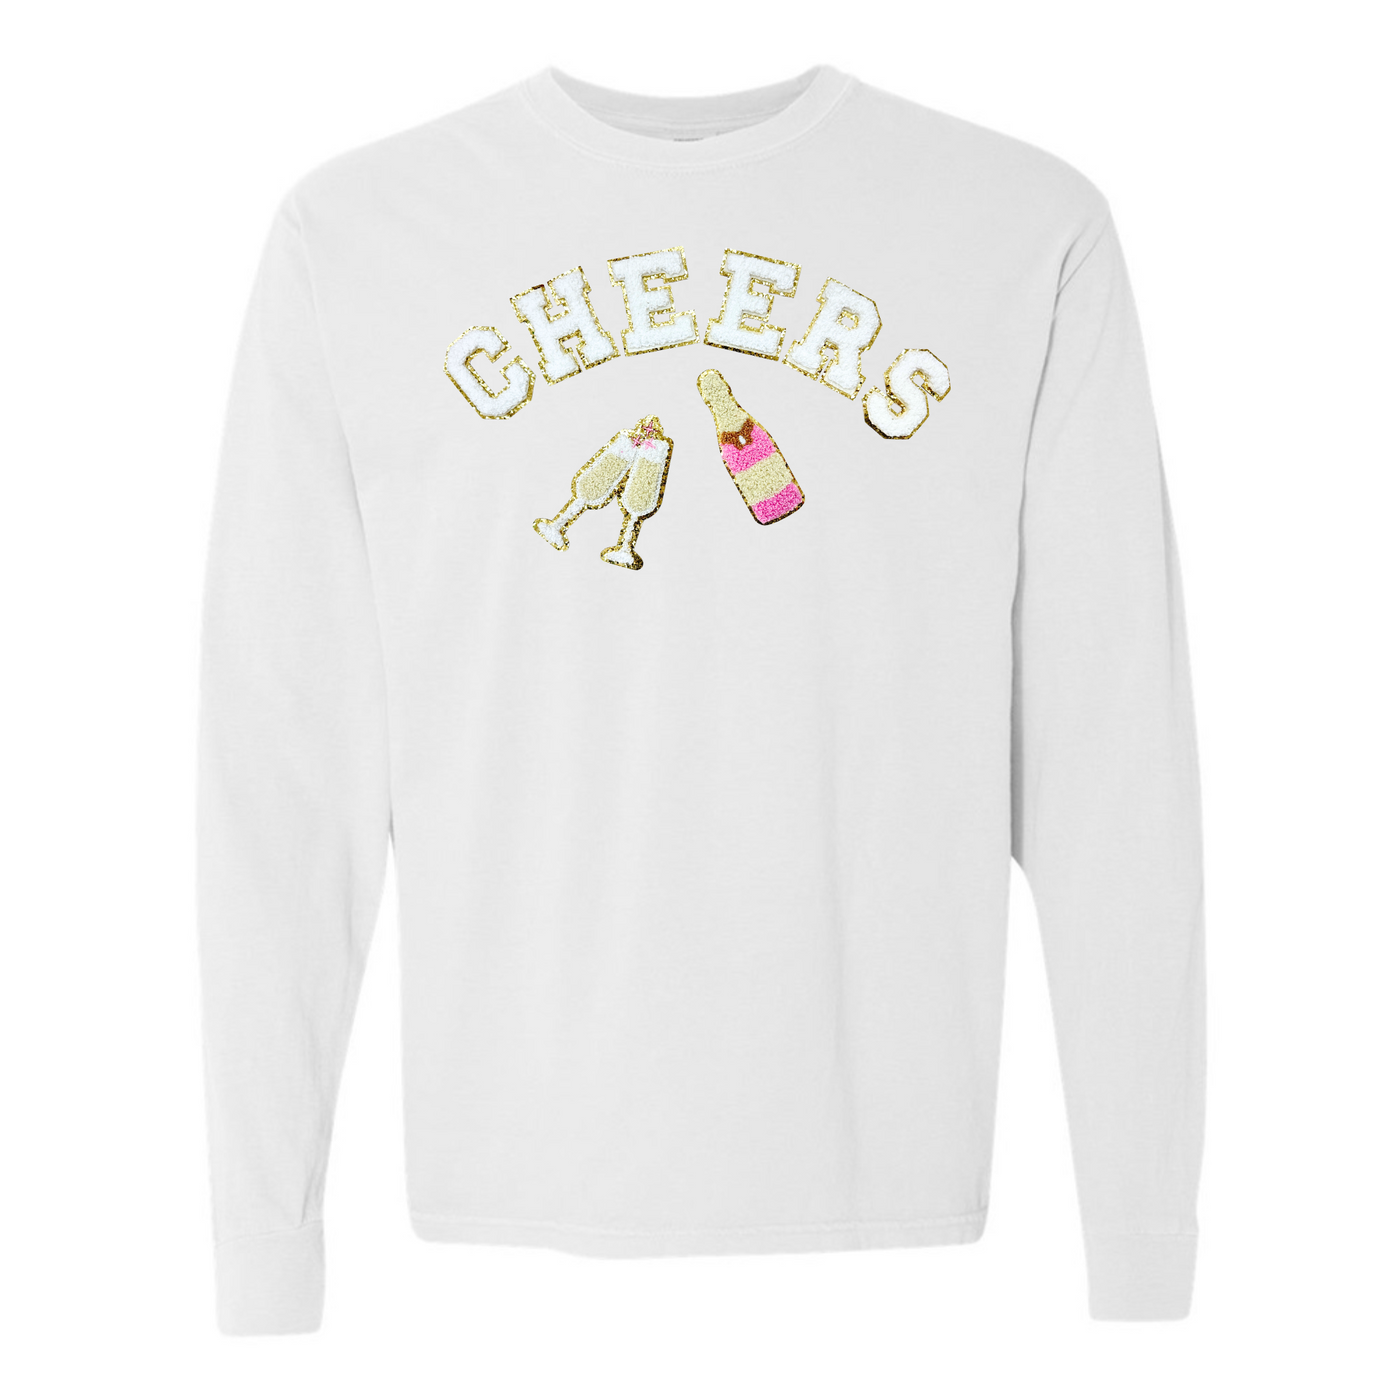 'Cheers' Letter Patch Long Sleeve